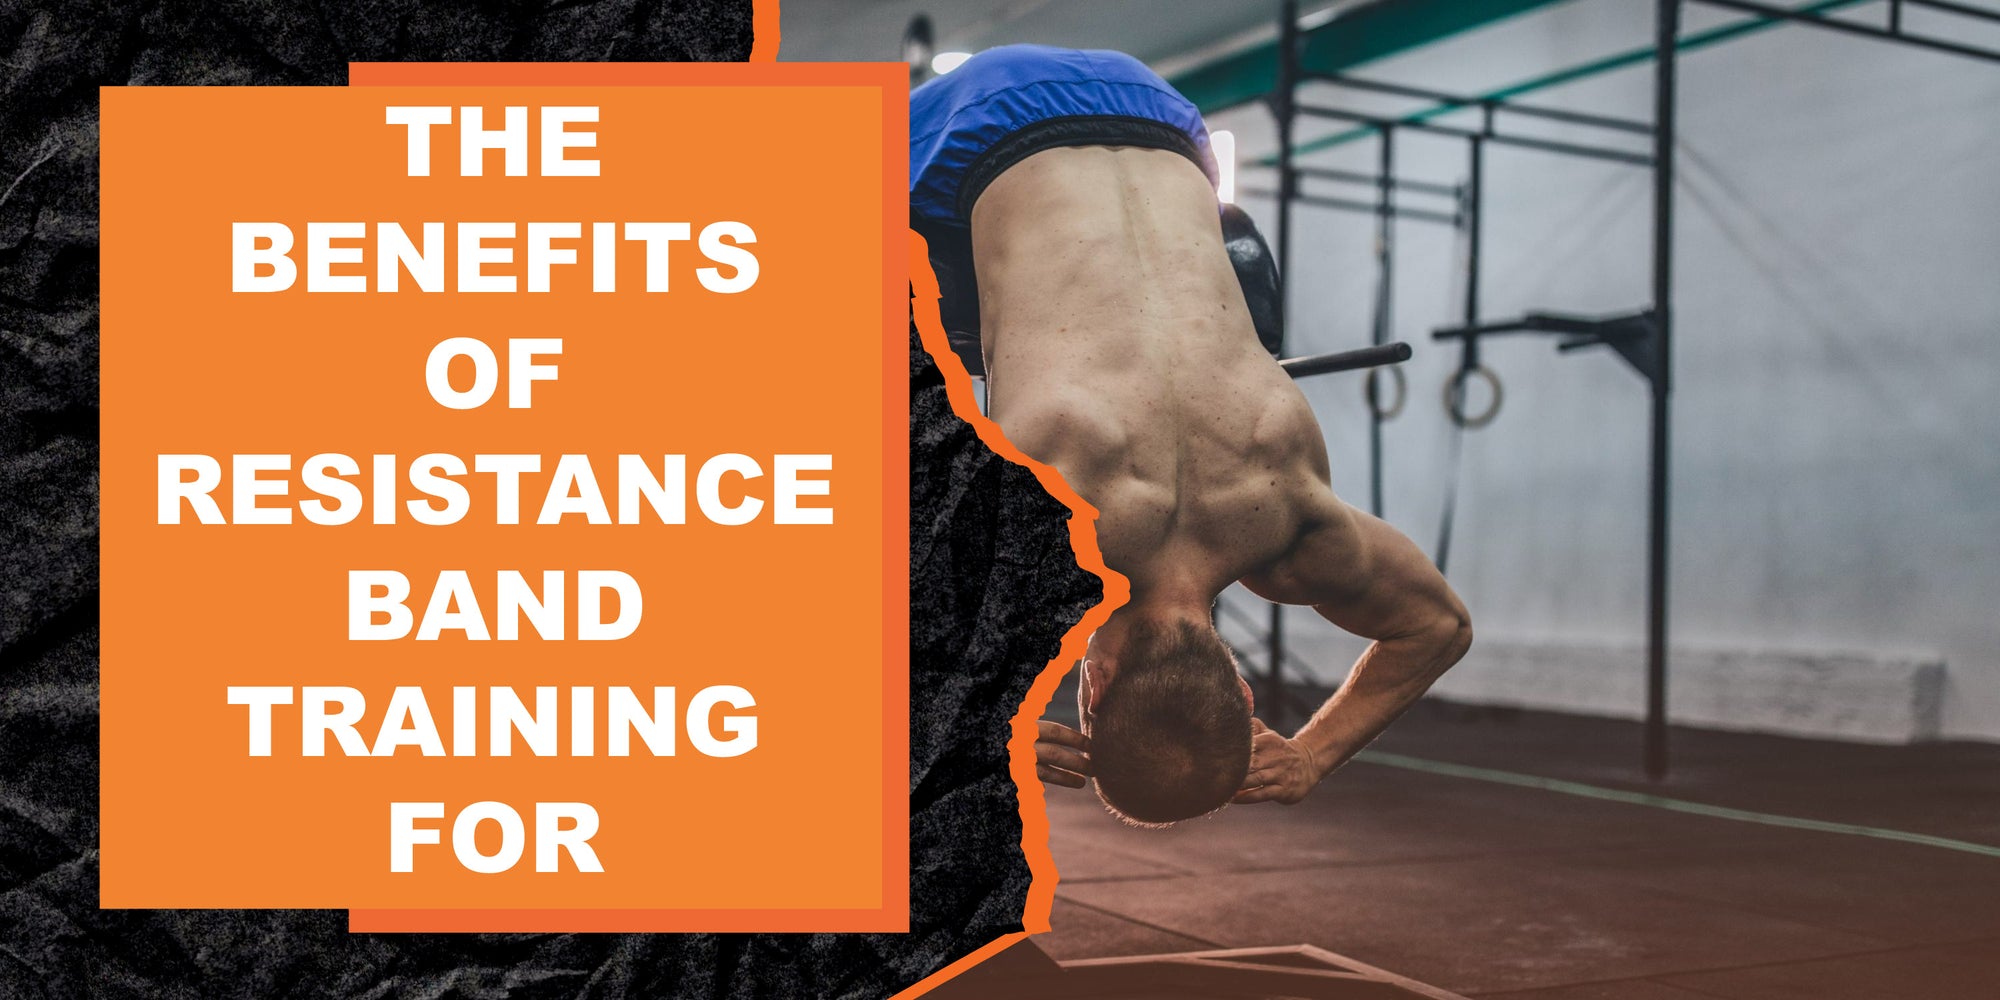 The Benefits of Resistance Band Training for Athletes